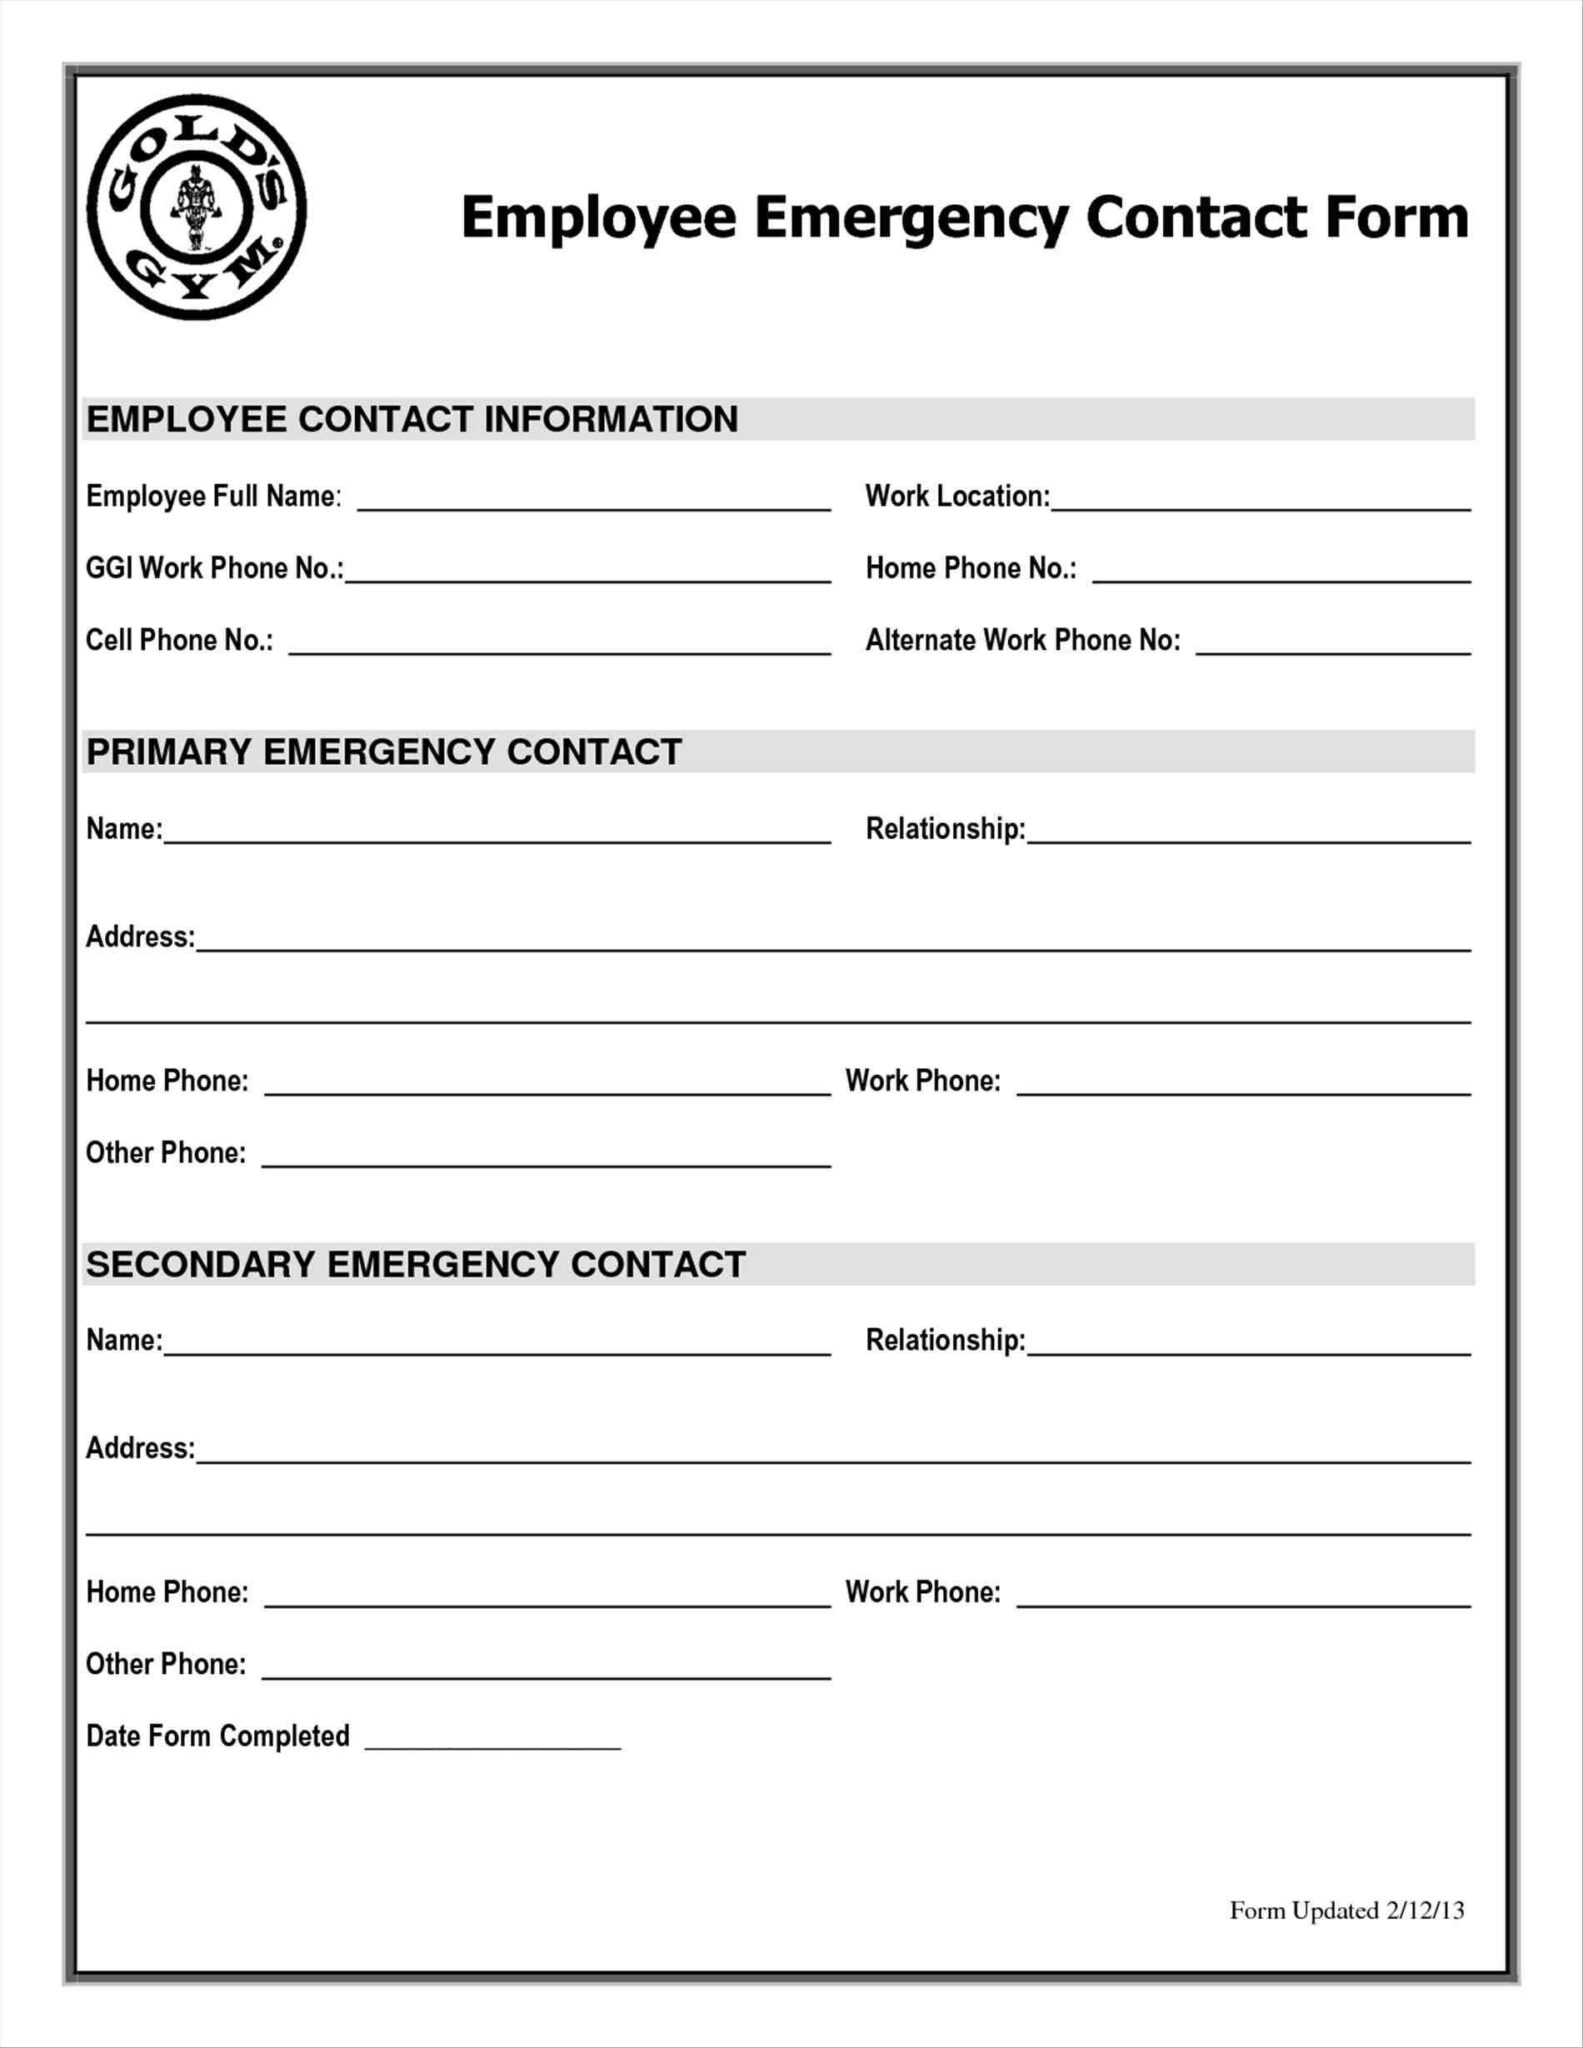 Emergency Contact Form Example